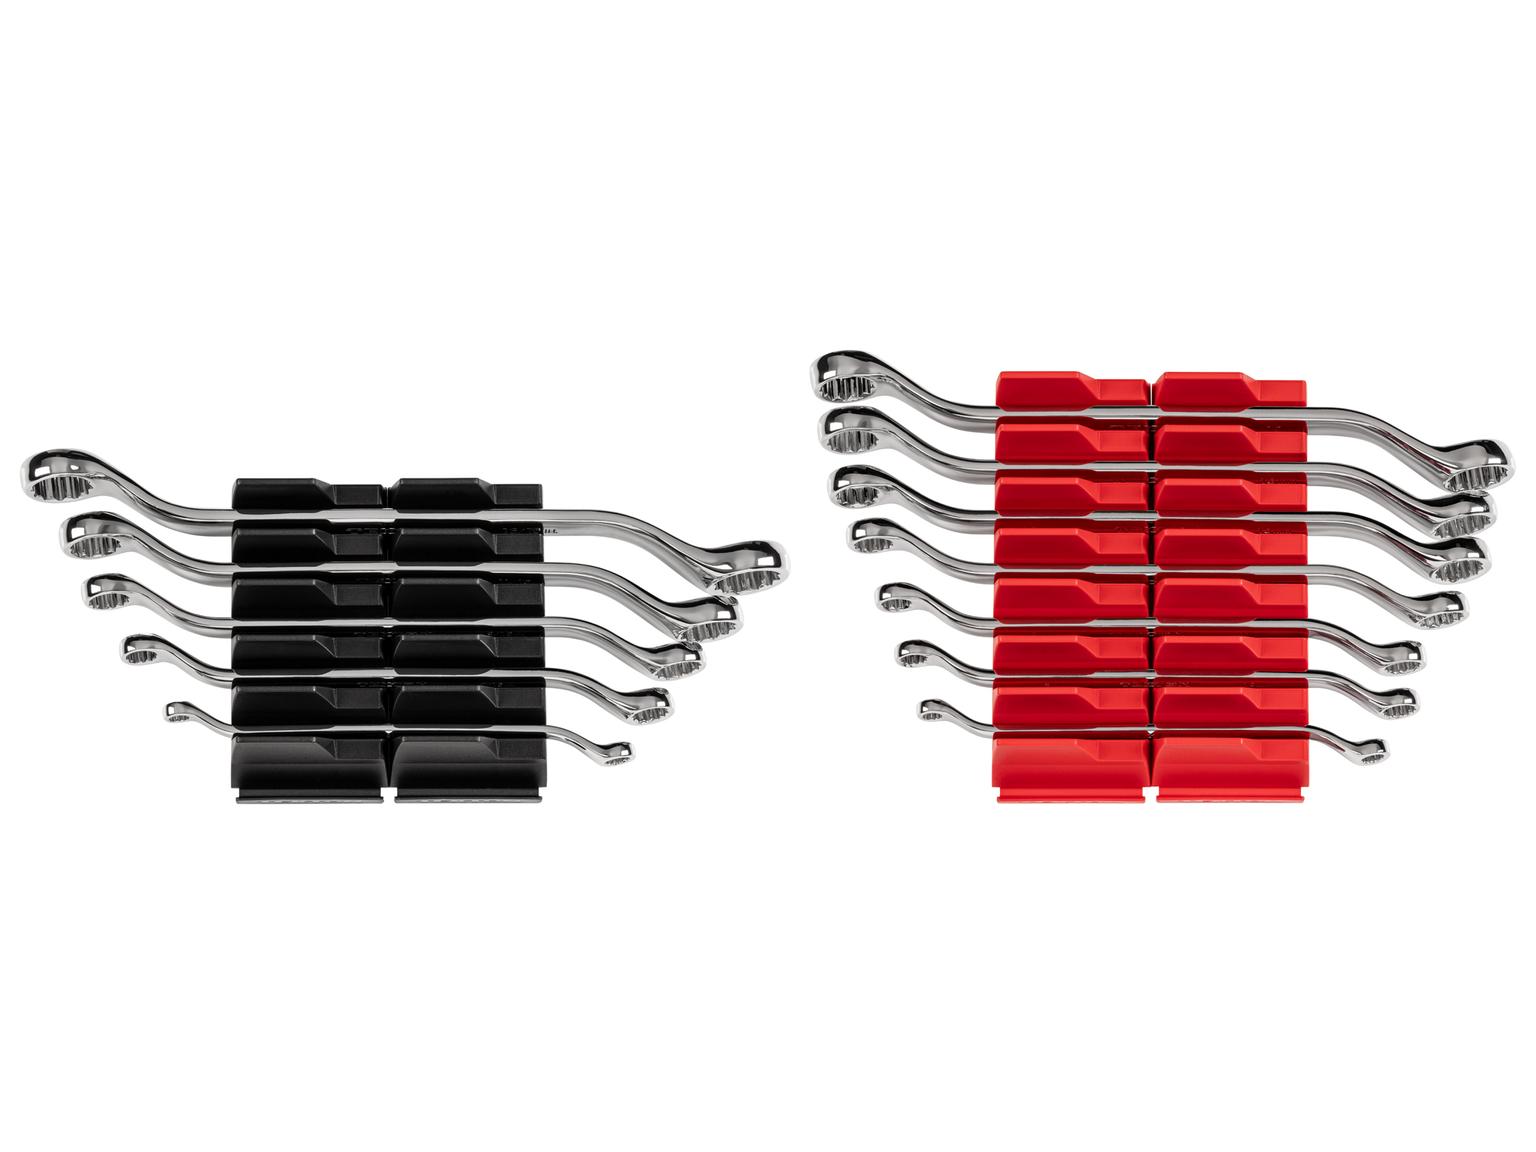 45-Degree Offset Box End Wrench Set with Modular Wrench Organizer, 12-Piece (1/4-13/16 in., 6-19 mm)